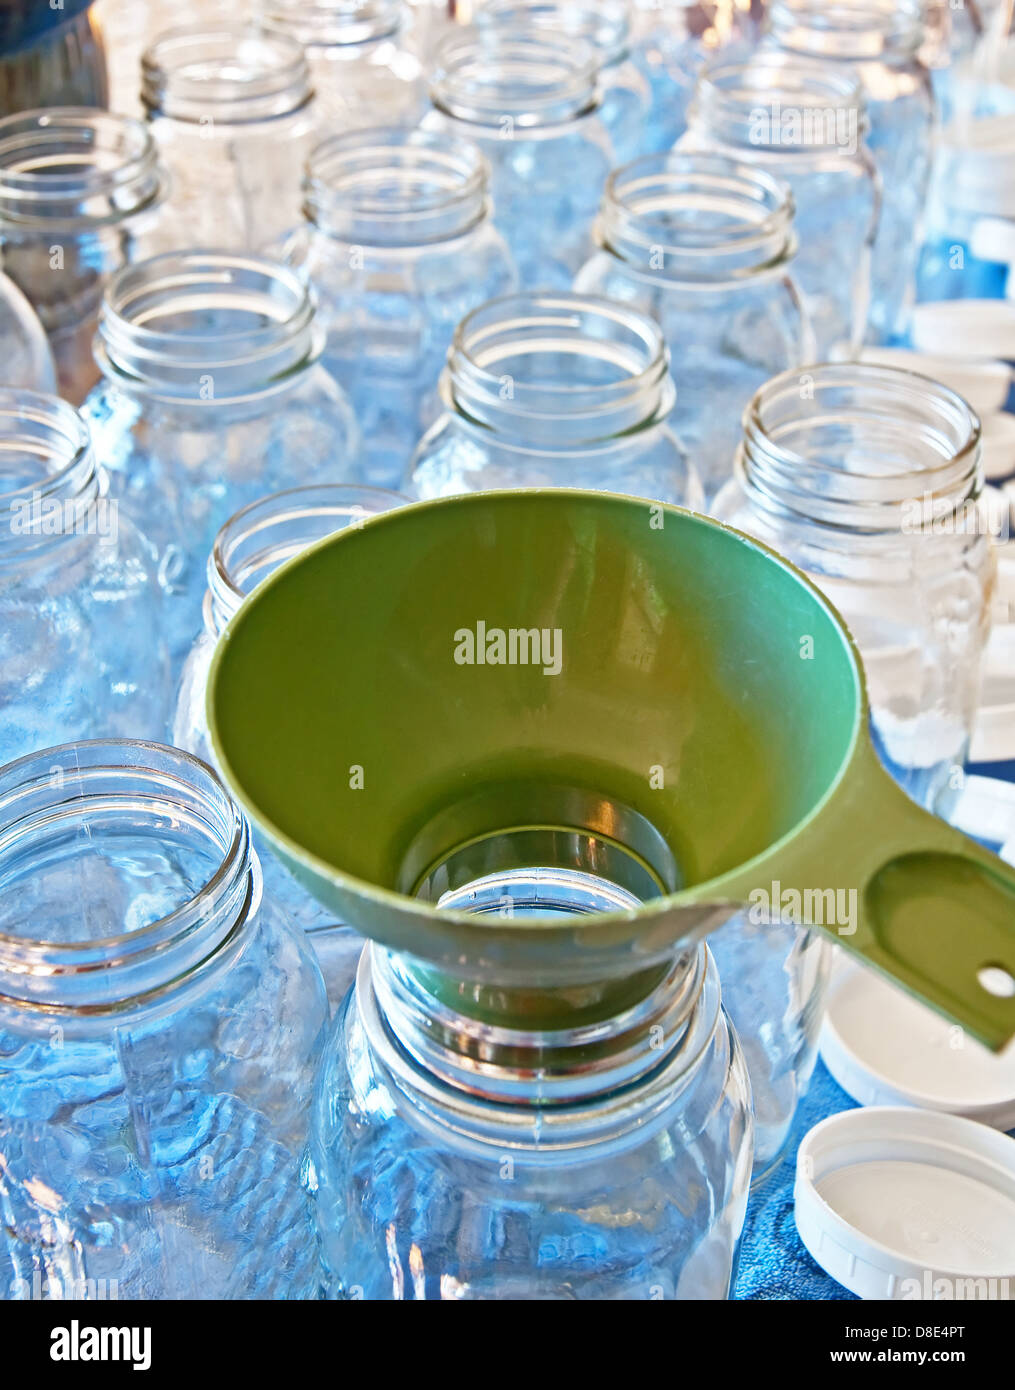 https://c8.alamy.com/comp/D8E4PT/clean-canning-jars-in-quart-size-with-a-green-funnel-in-preparation-D8E4PT.jpg